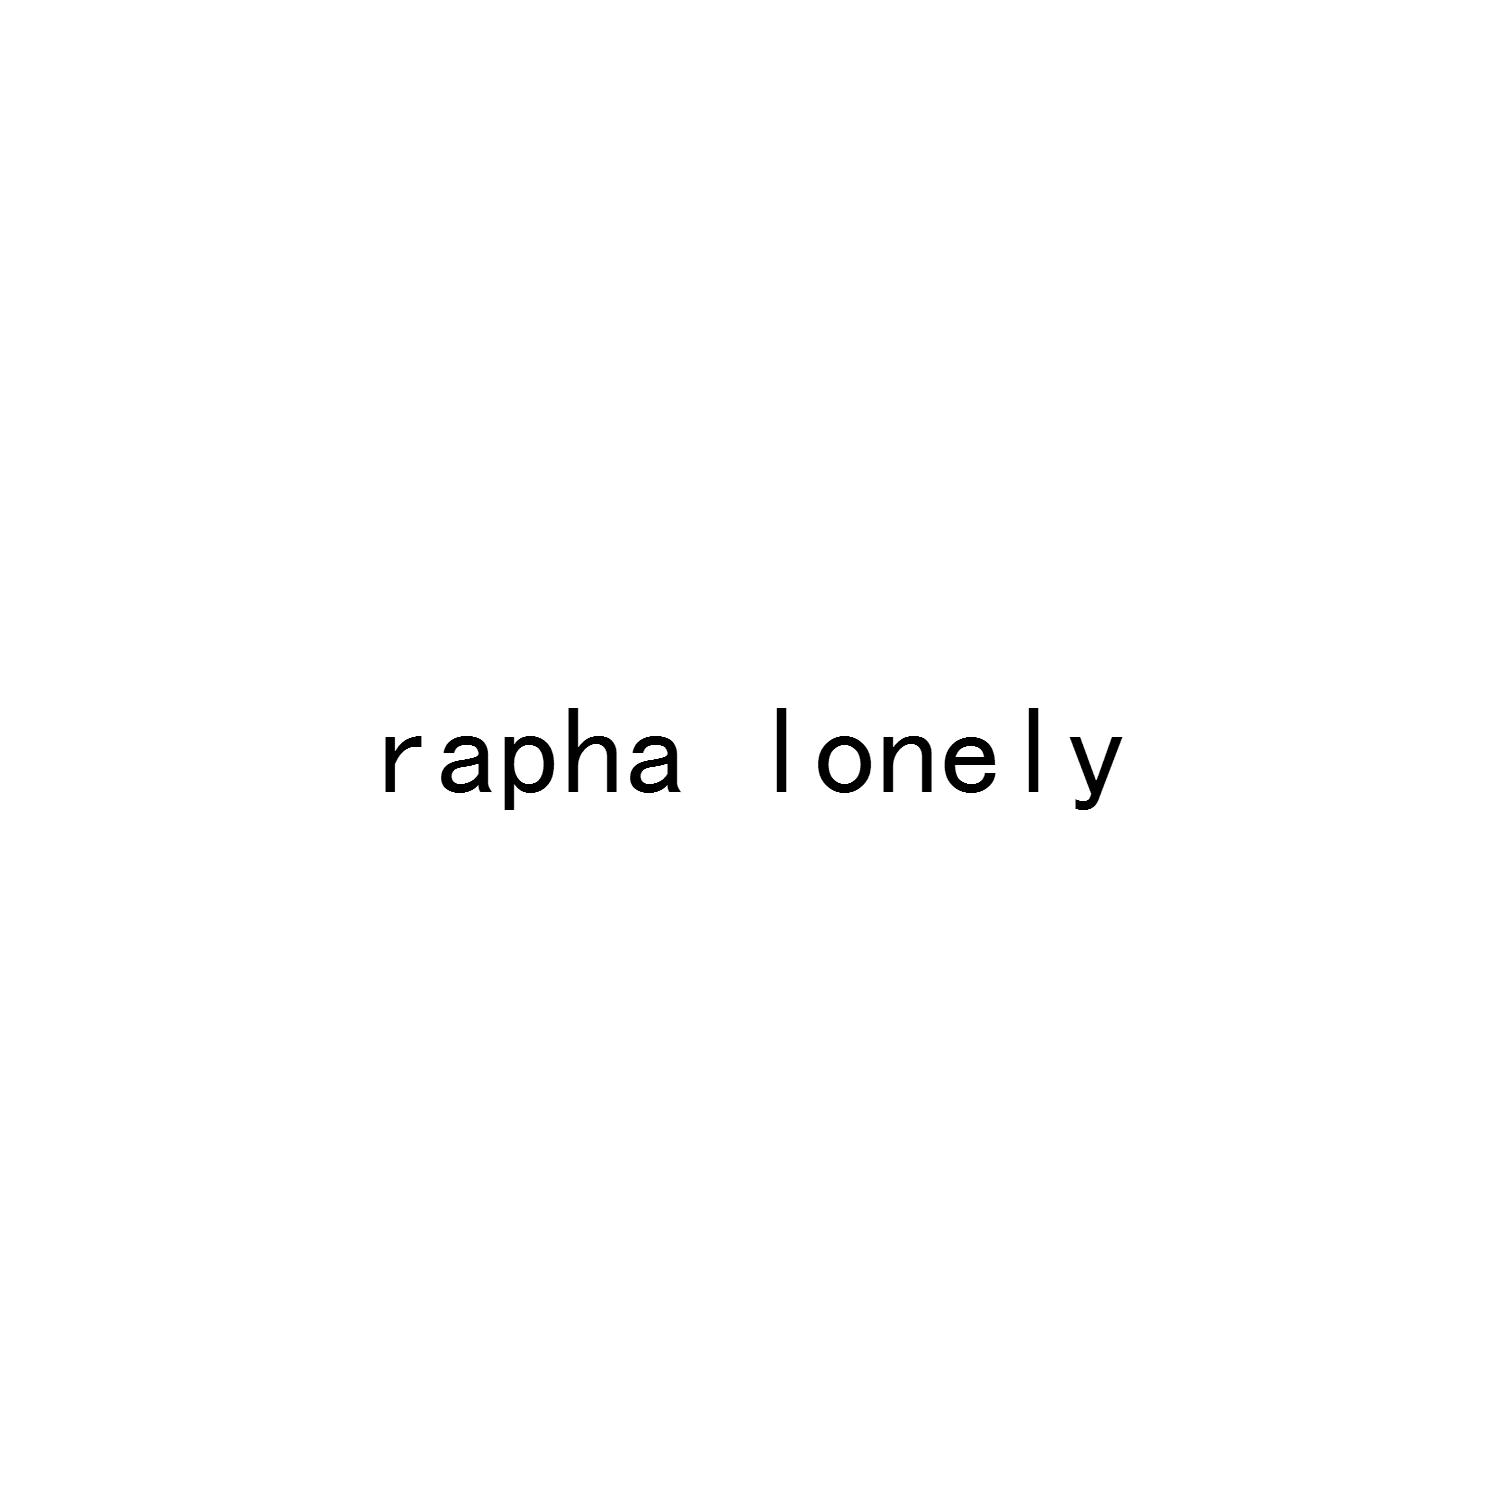 RAPHA LONELY